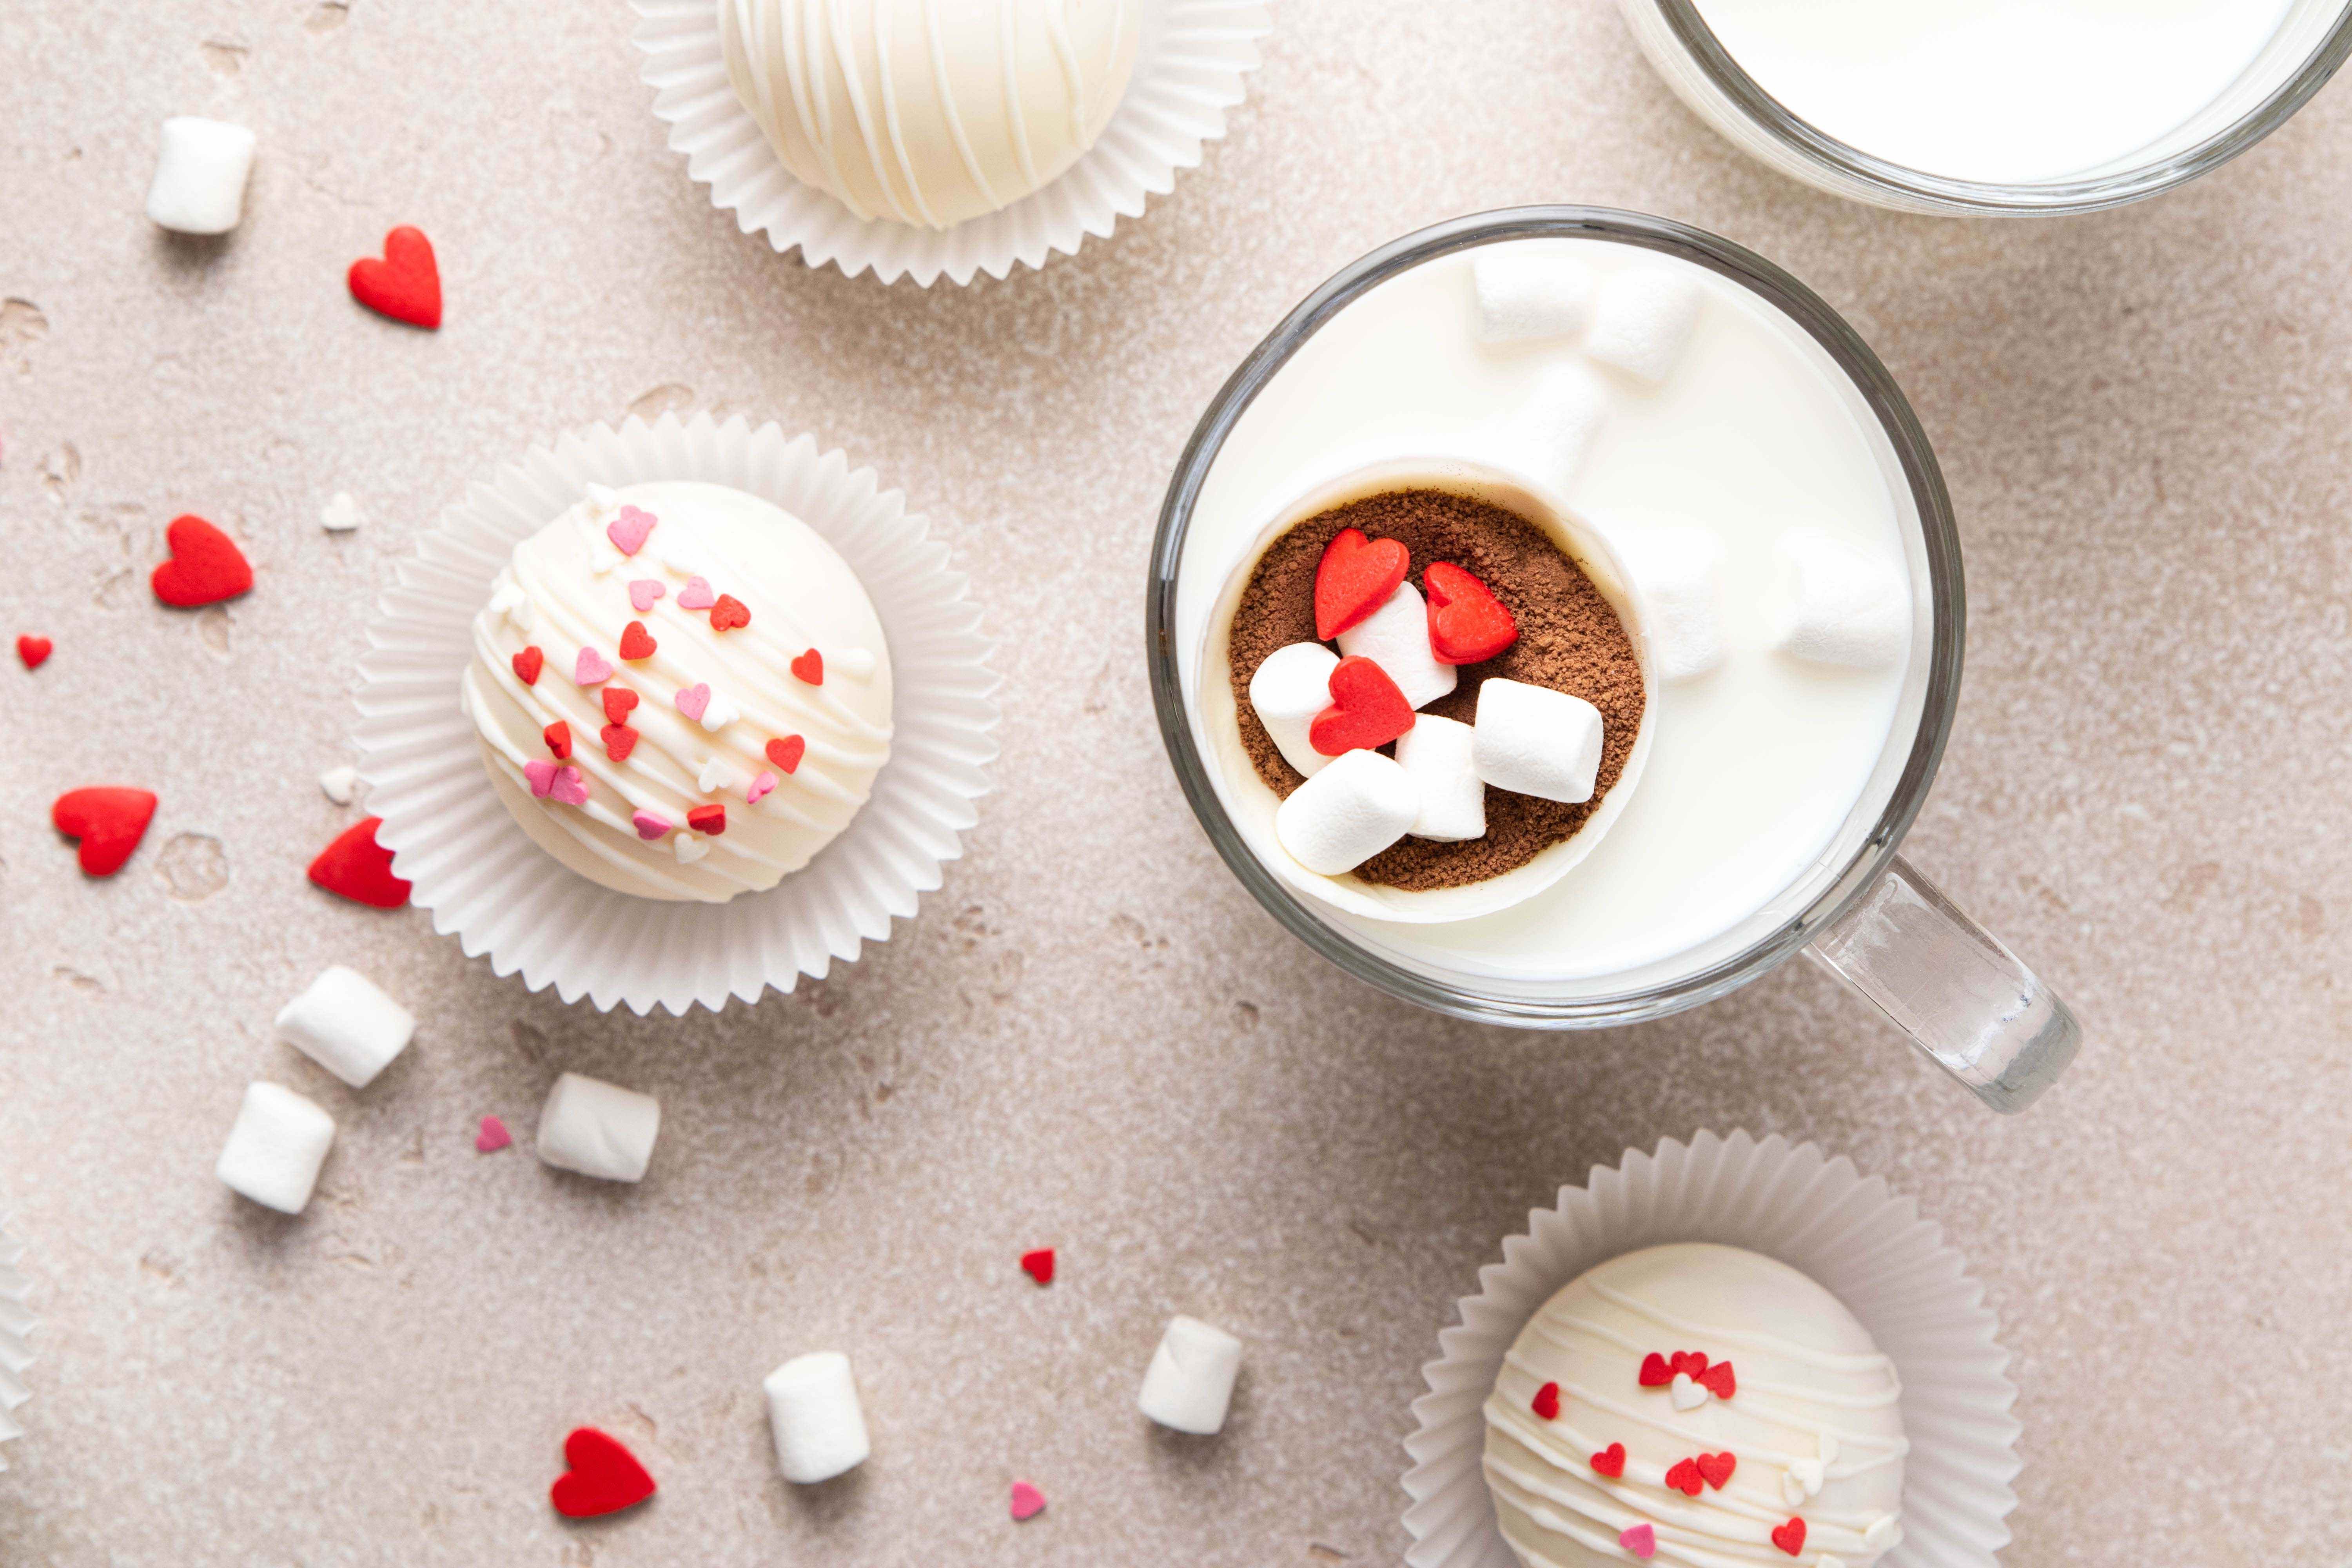 Hot cocoa bombs decorated with candy hearts to give as Valentine’s Day gifts.